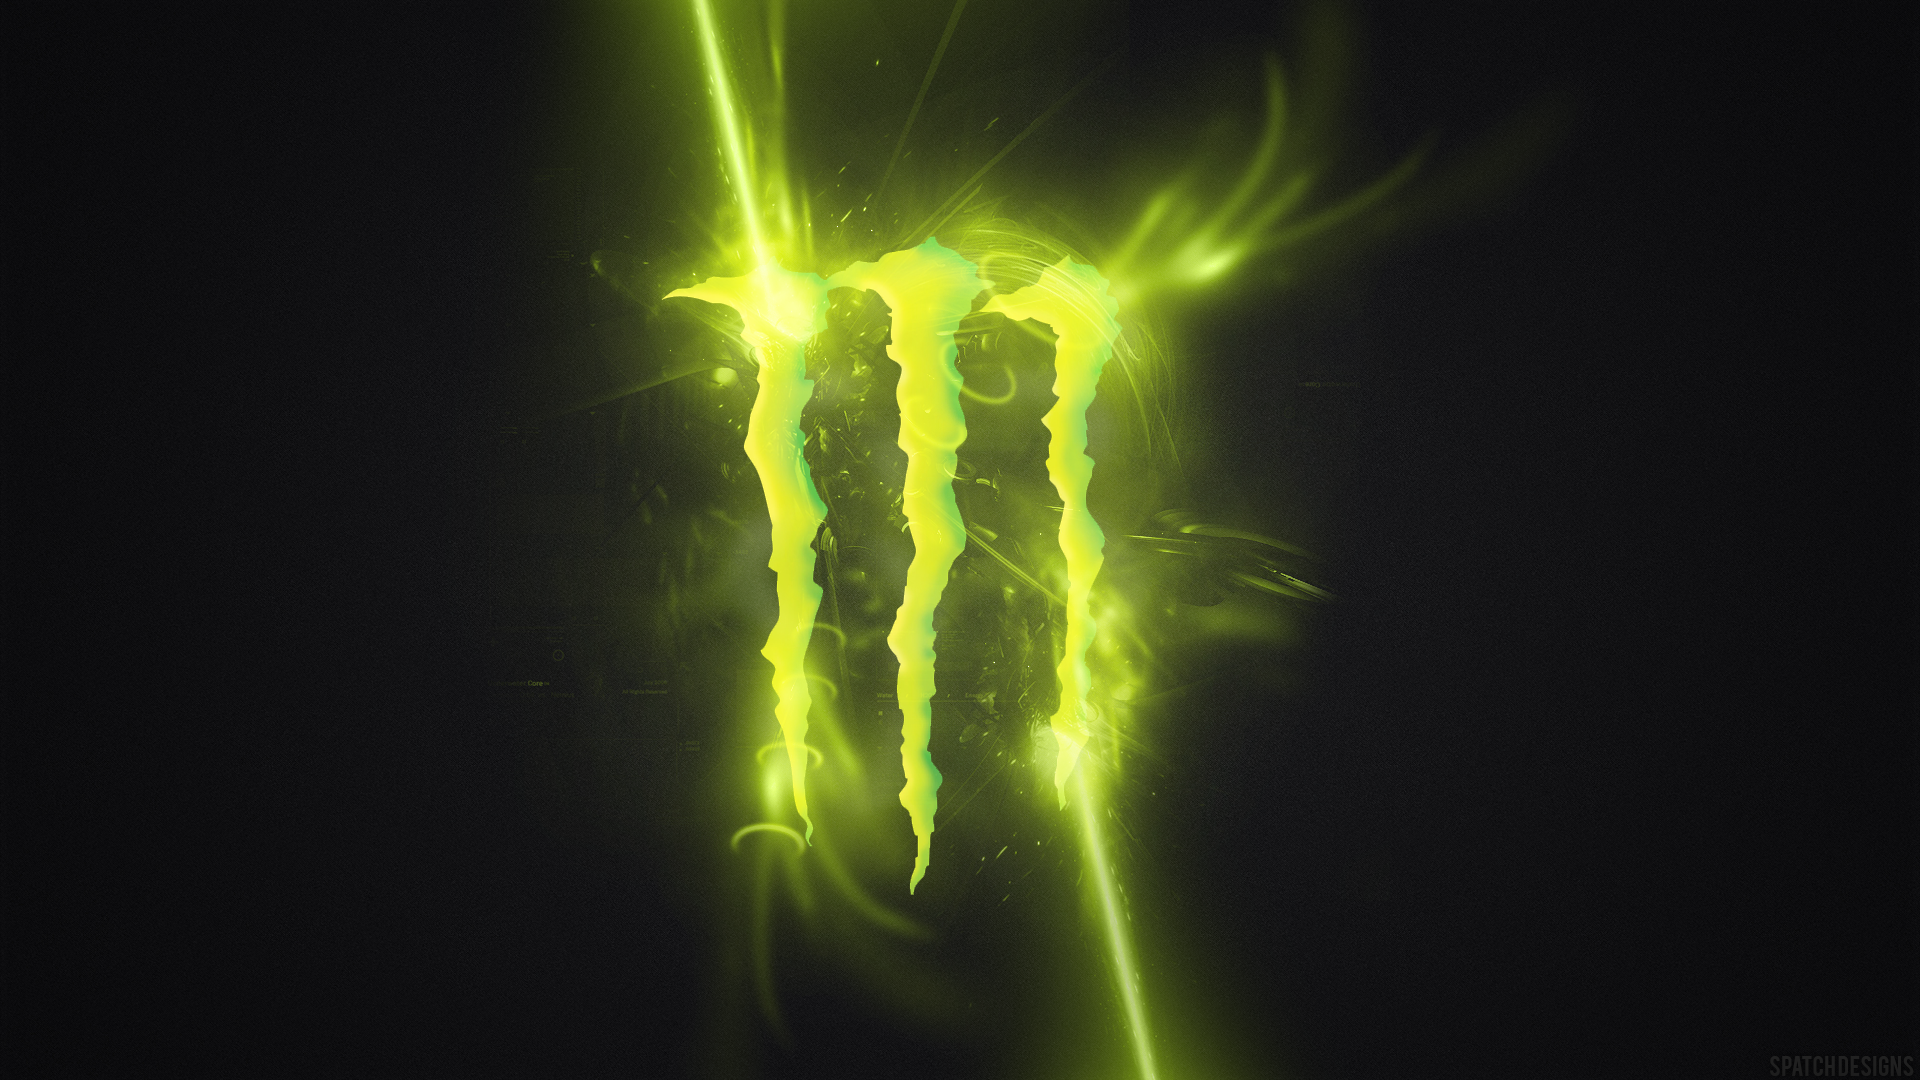 Beautiful Monster Energy Logo HD Wallpaper Picture Sharing